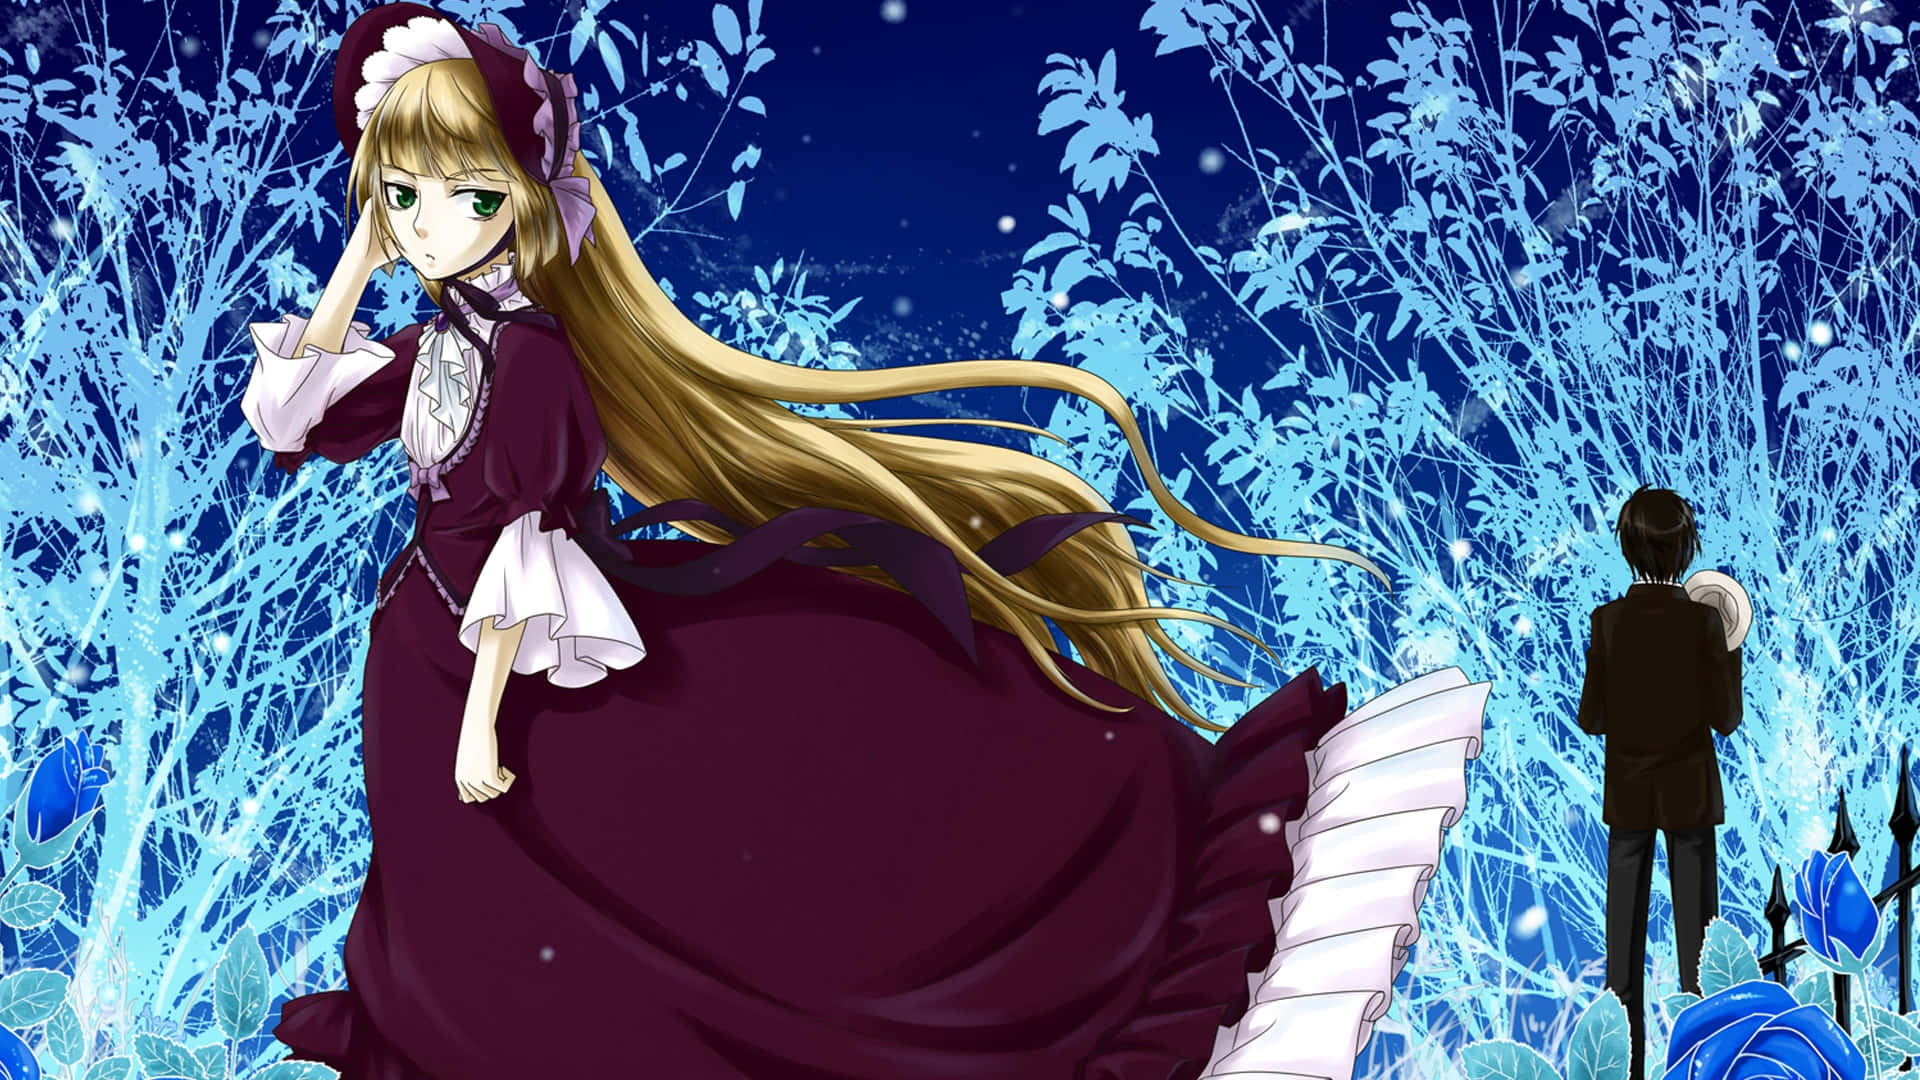 Anime Girl In A Dress Standing In The Snow